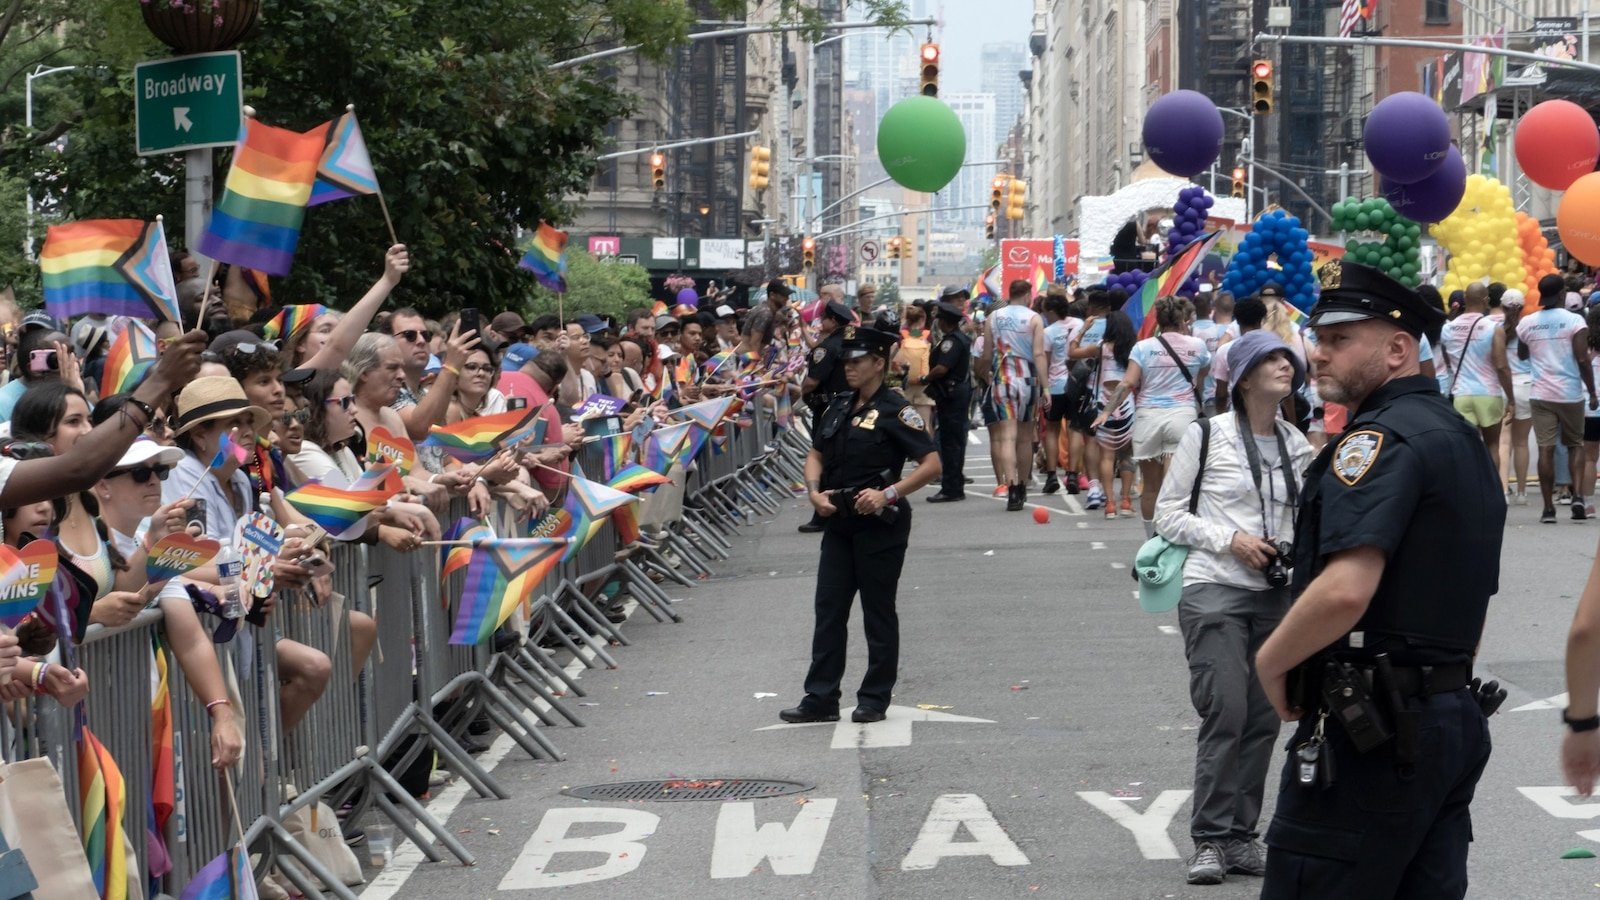 Pride march, related events could be targets for violence, NYPD says